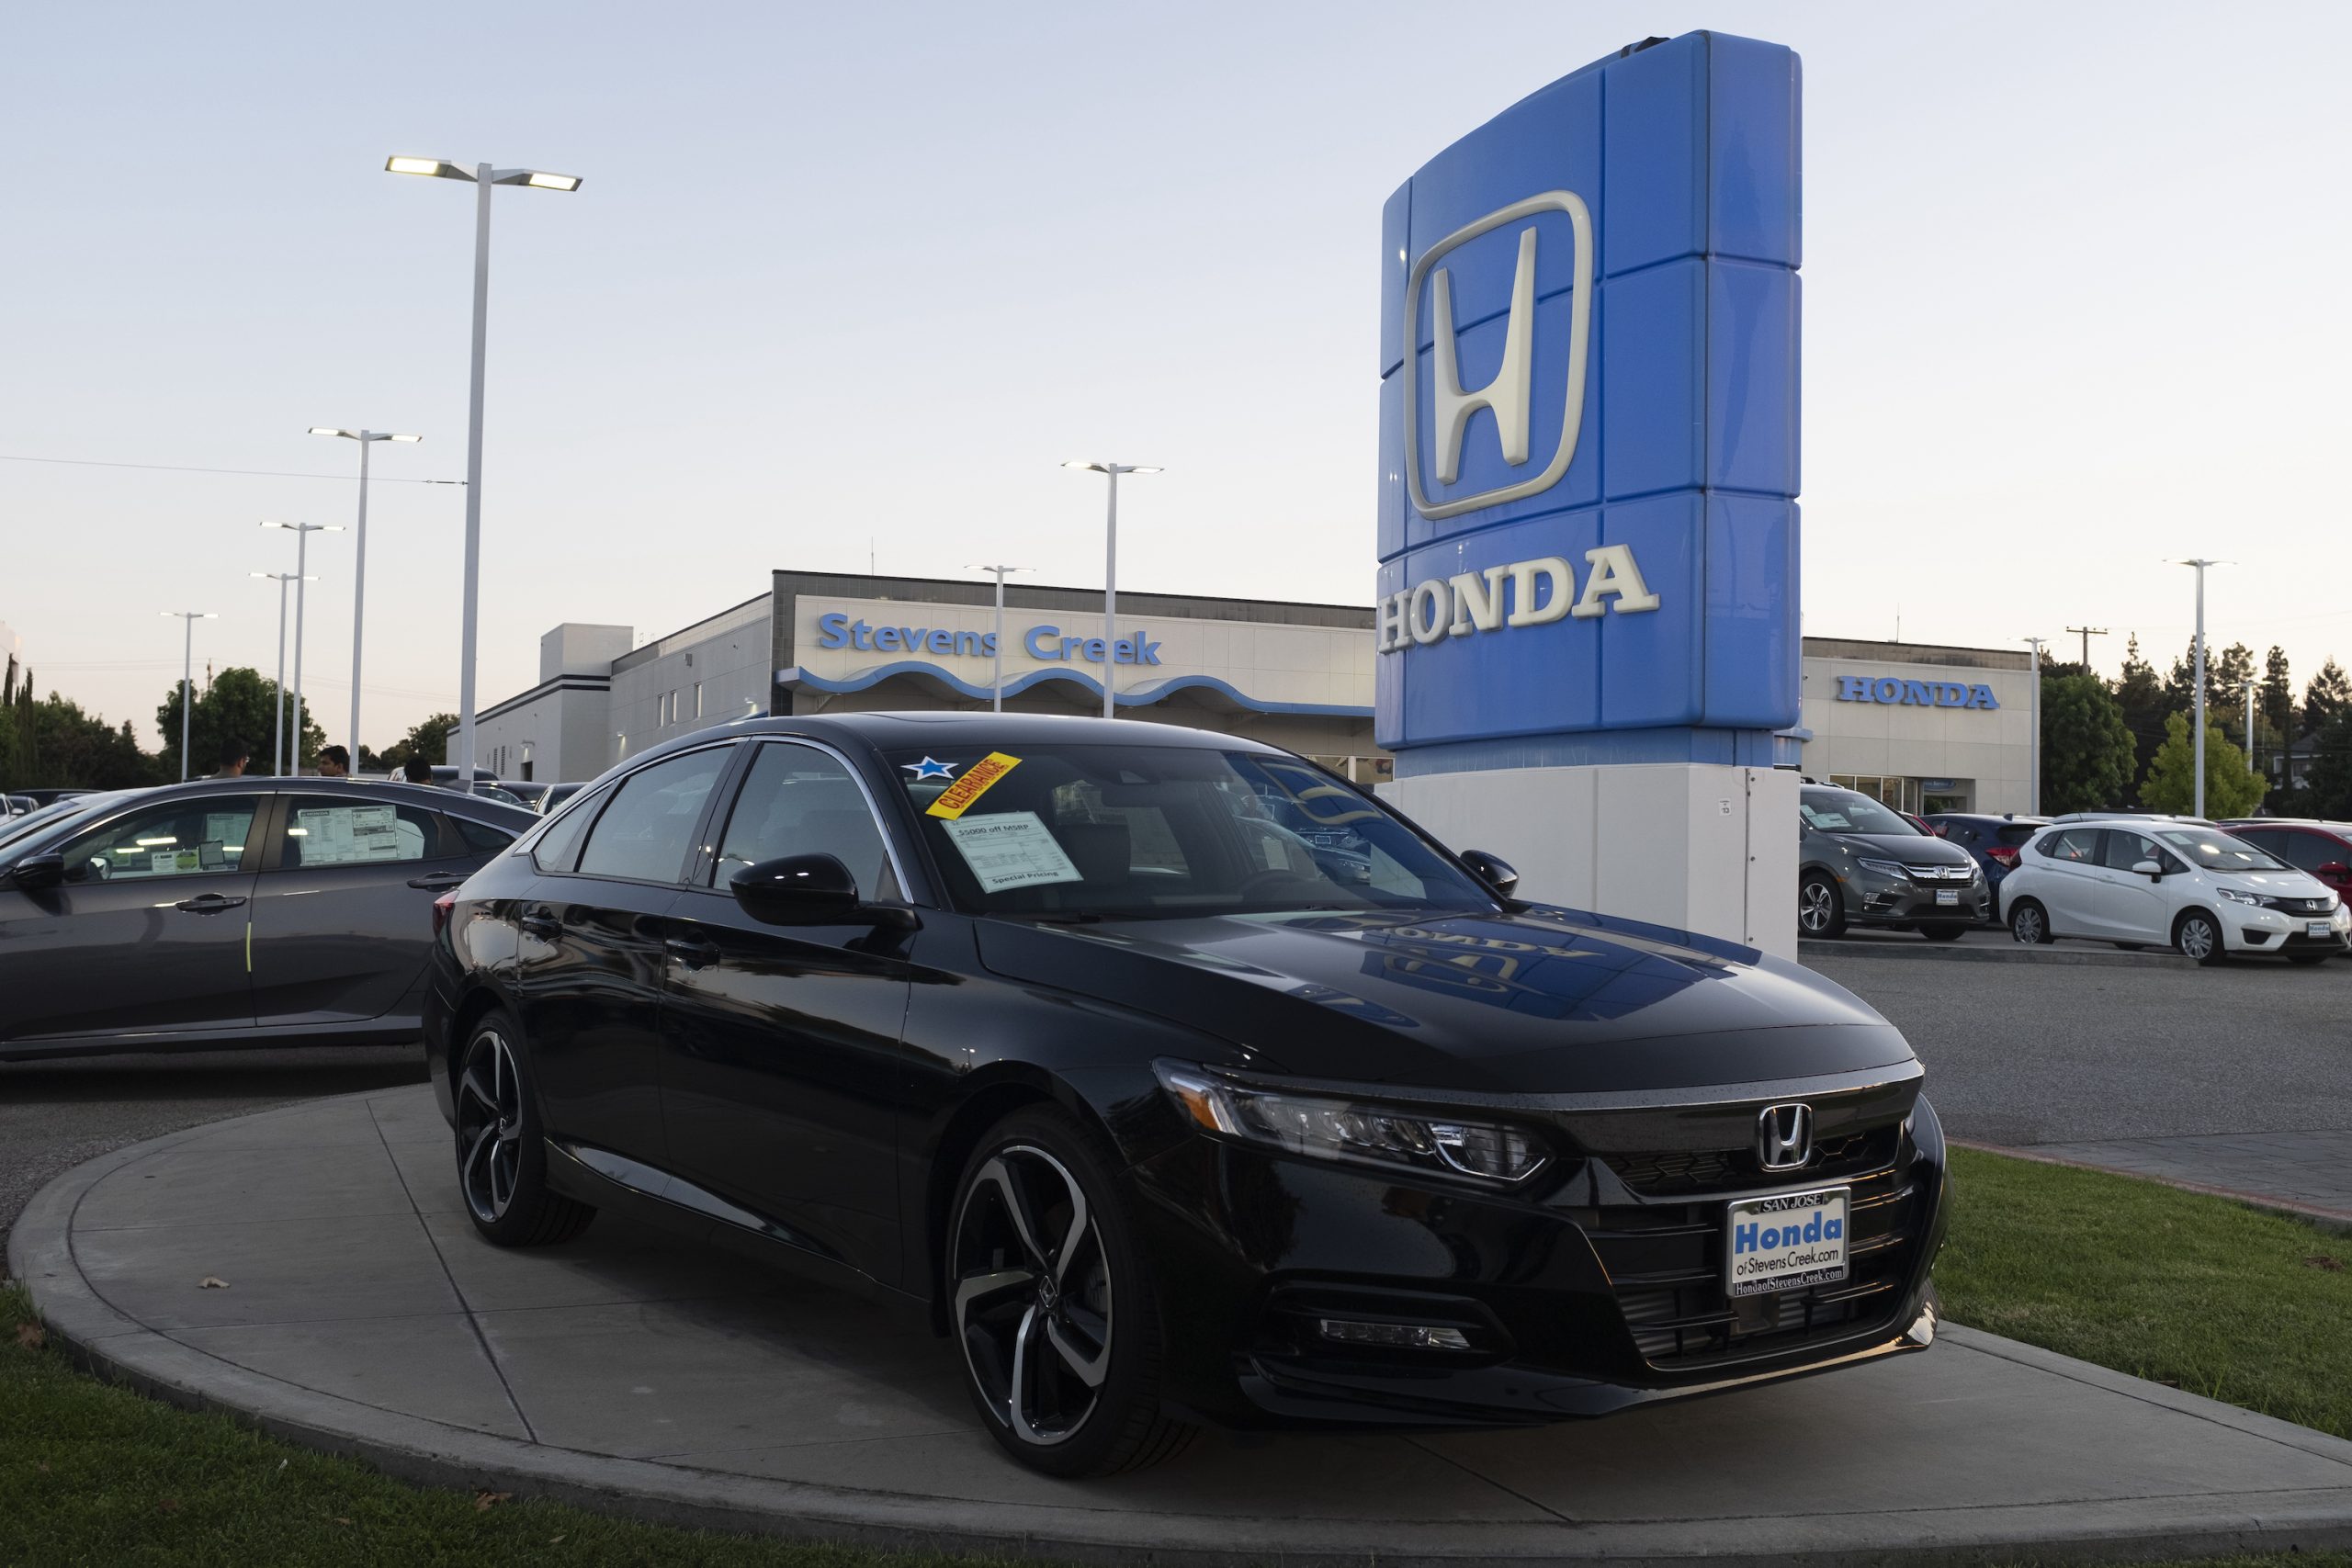 Honda logo and Honda Accord vehicle are seen at a store in San Jose, California on August 27, 2019